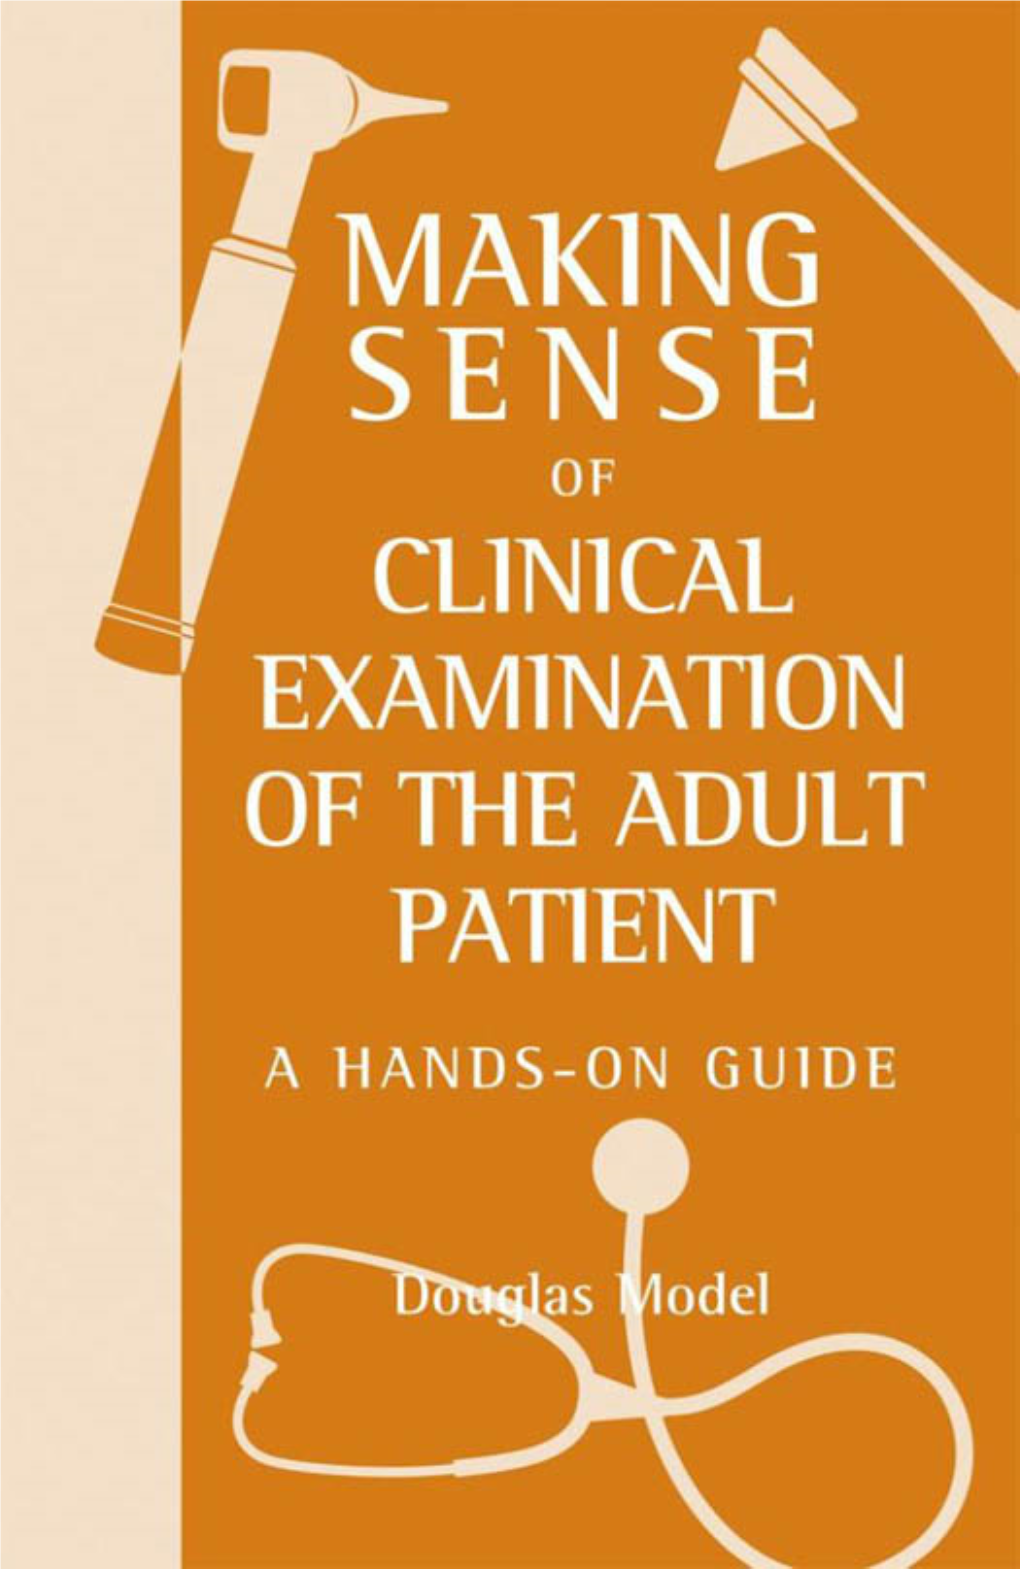 MAKING SENSE of CLINICAL EXAMINATION of the ADULT PATIENT This Page Intentionally Left Blank MAKING SENSE of CLINICAL EXAMINATION of the ADULT PATIENT